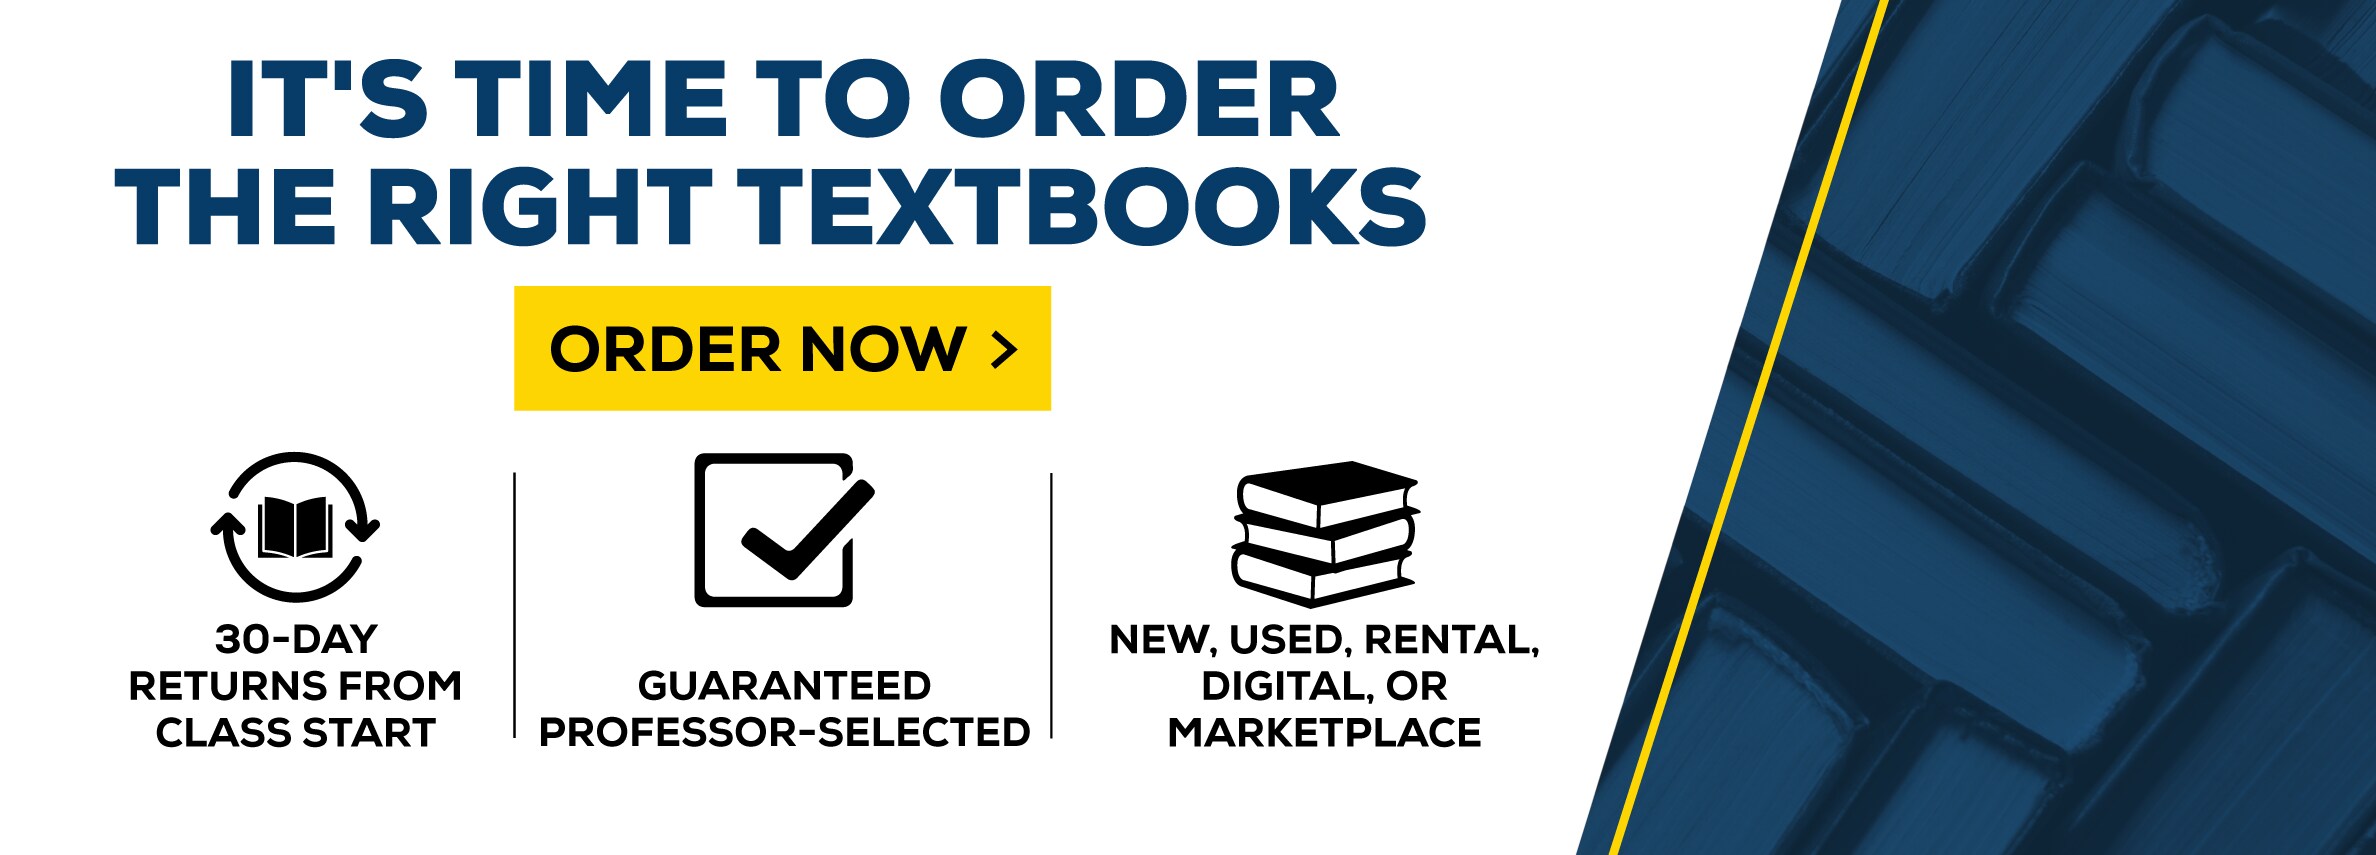 ItÃ¢â‚¬â„¢s time to order the right textbooks. Order now. 30-day returns from class start. Guaranteed professor-selected. New, Used, rental, digital, or marketplace. (new tab)